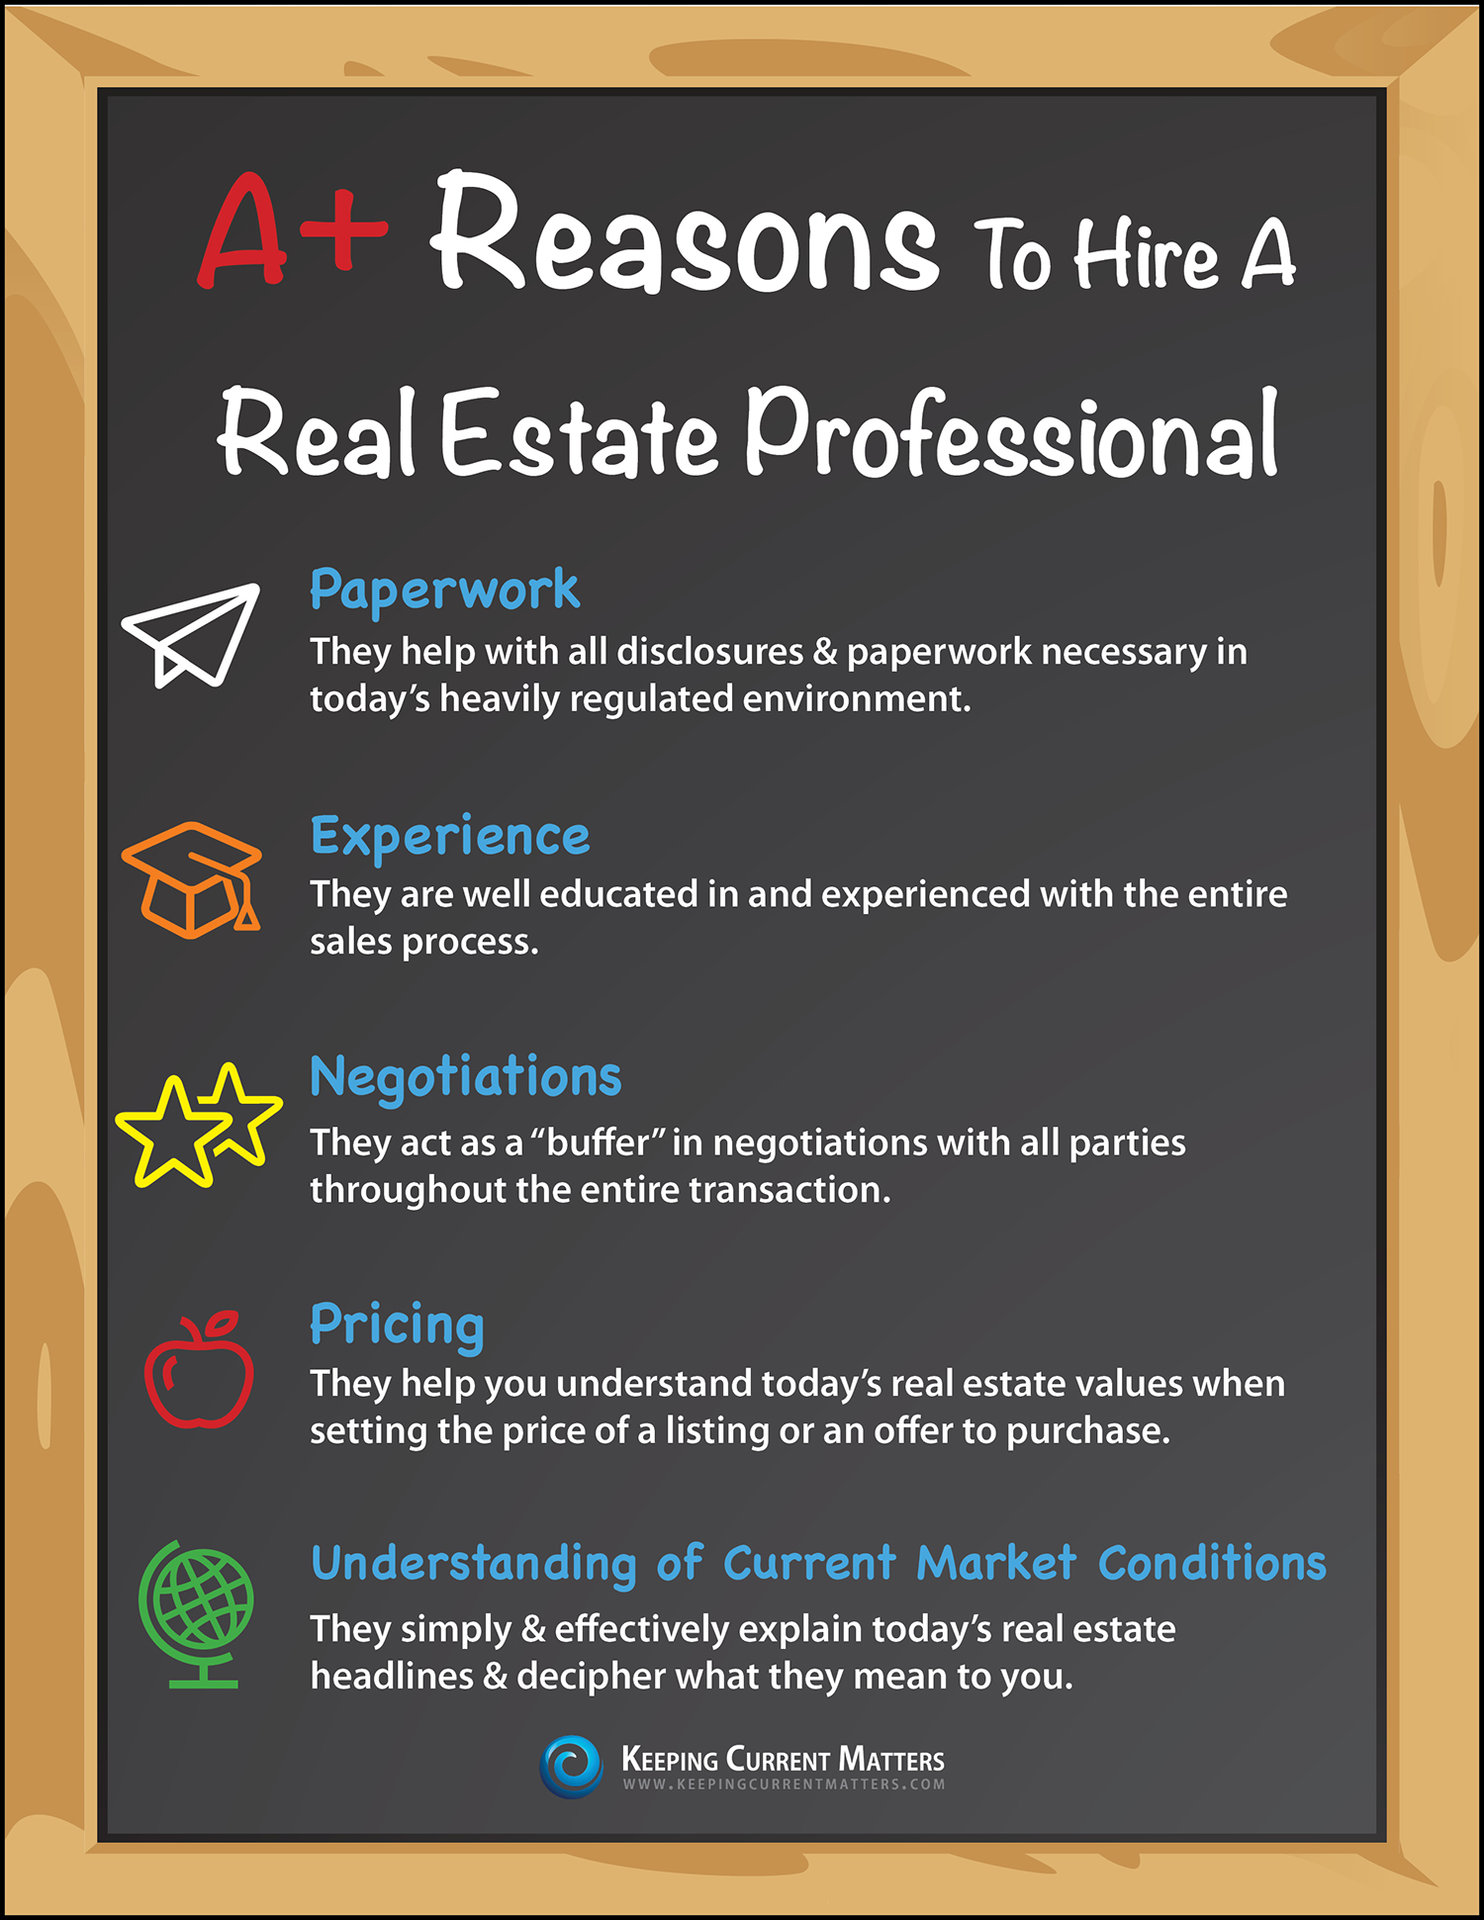 Want to Get an A? Hire A Real Estate Pro [INFOGRAPHIC] | Keeping Current Matters